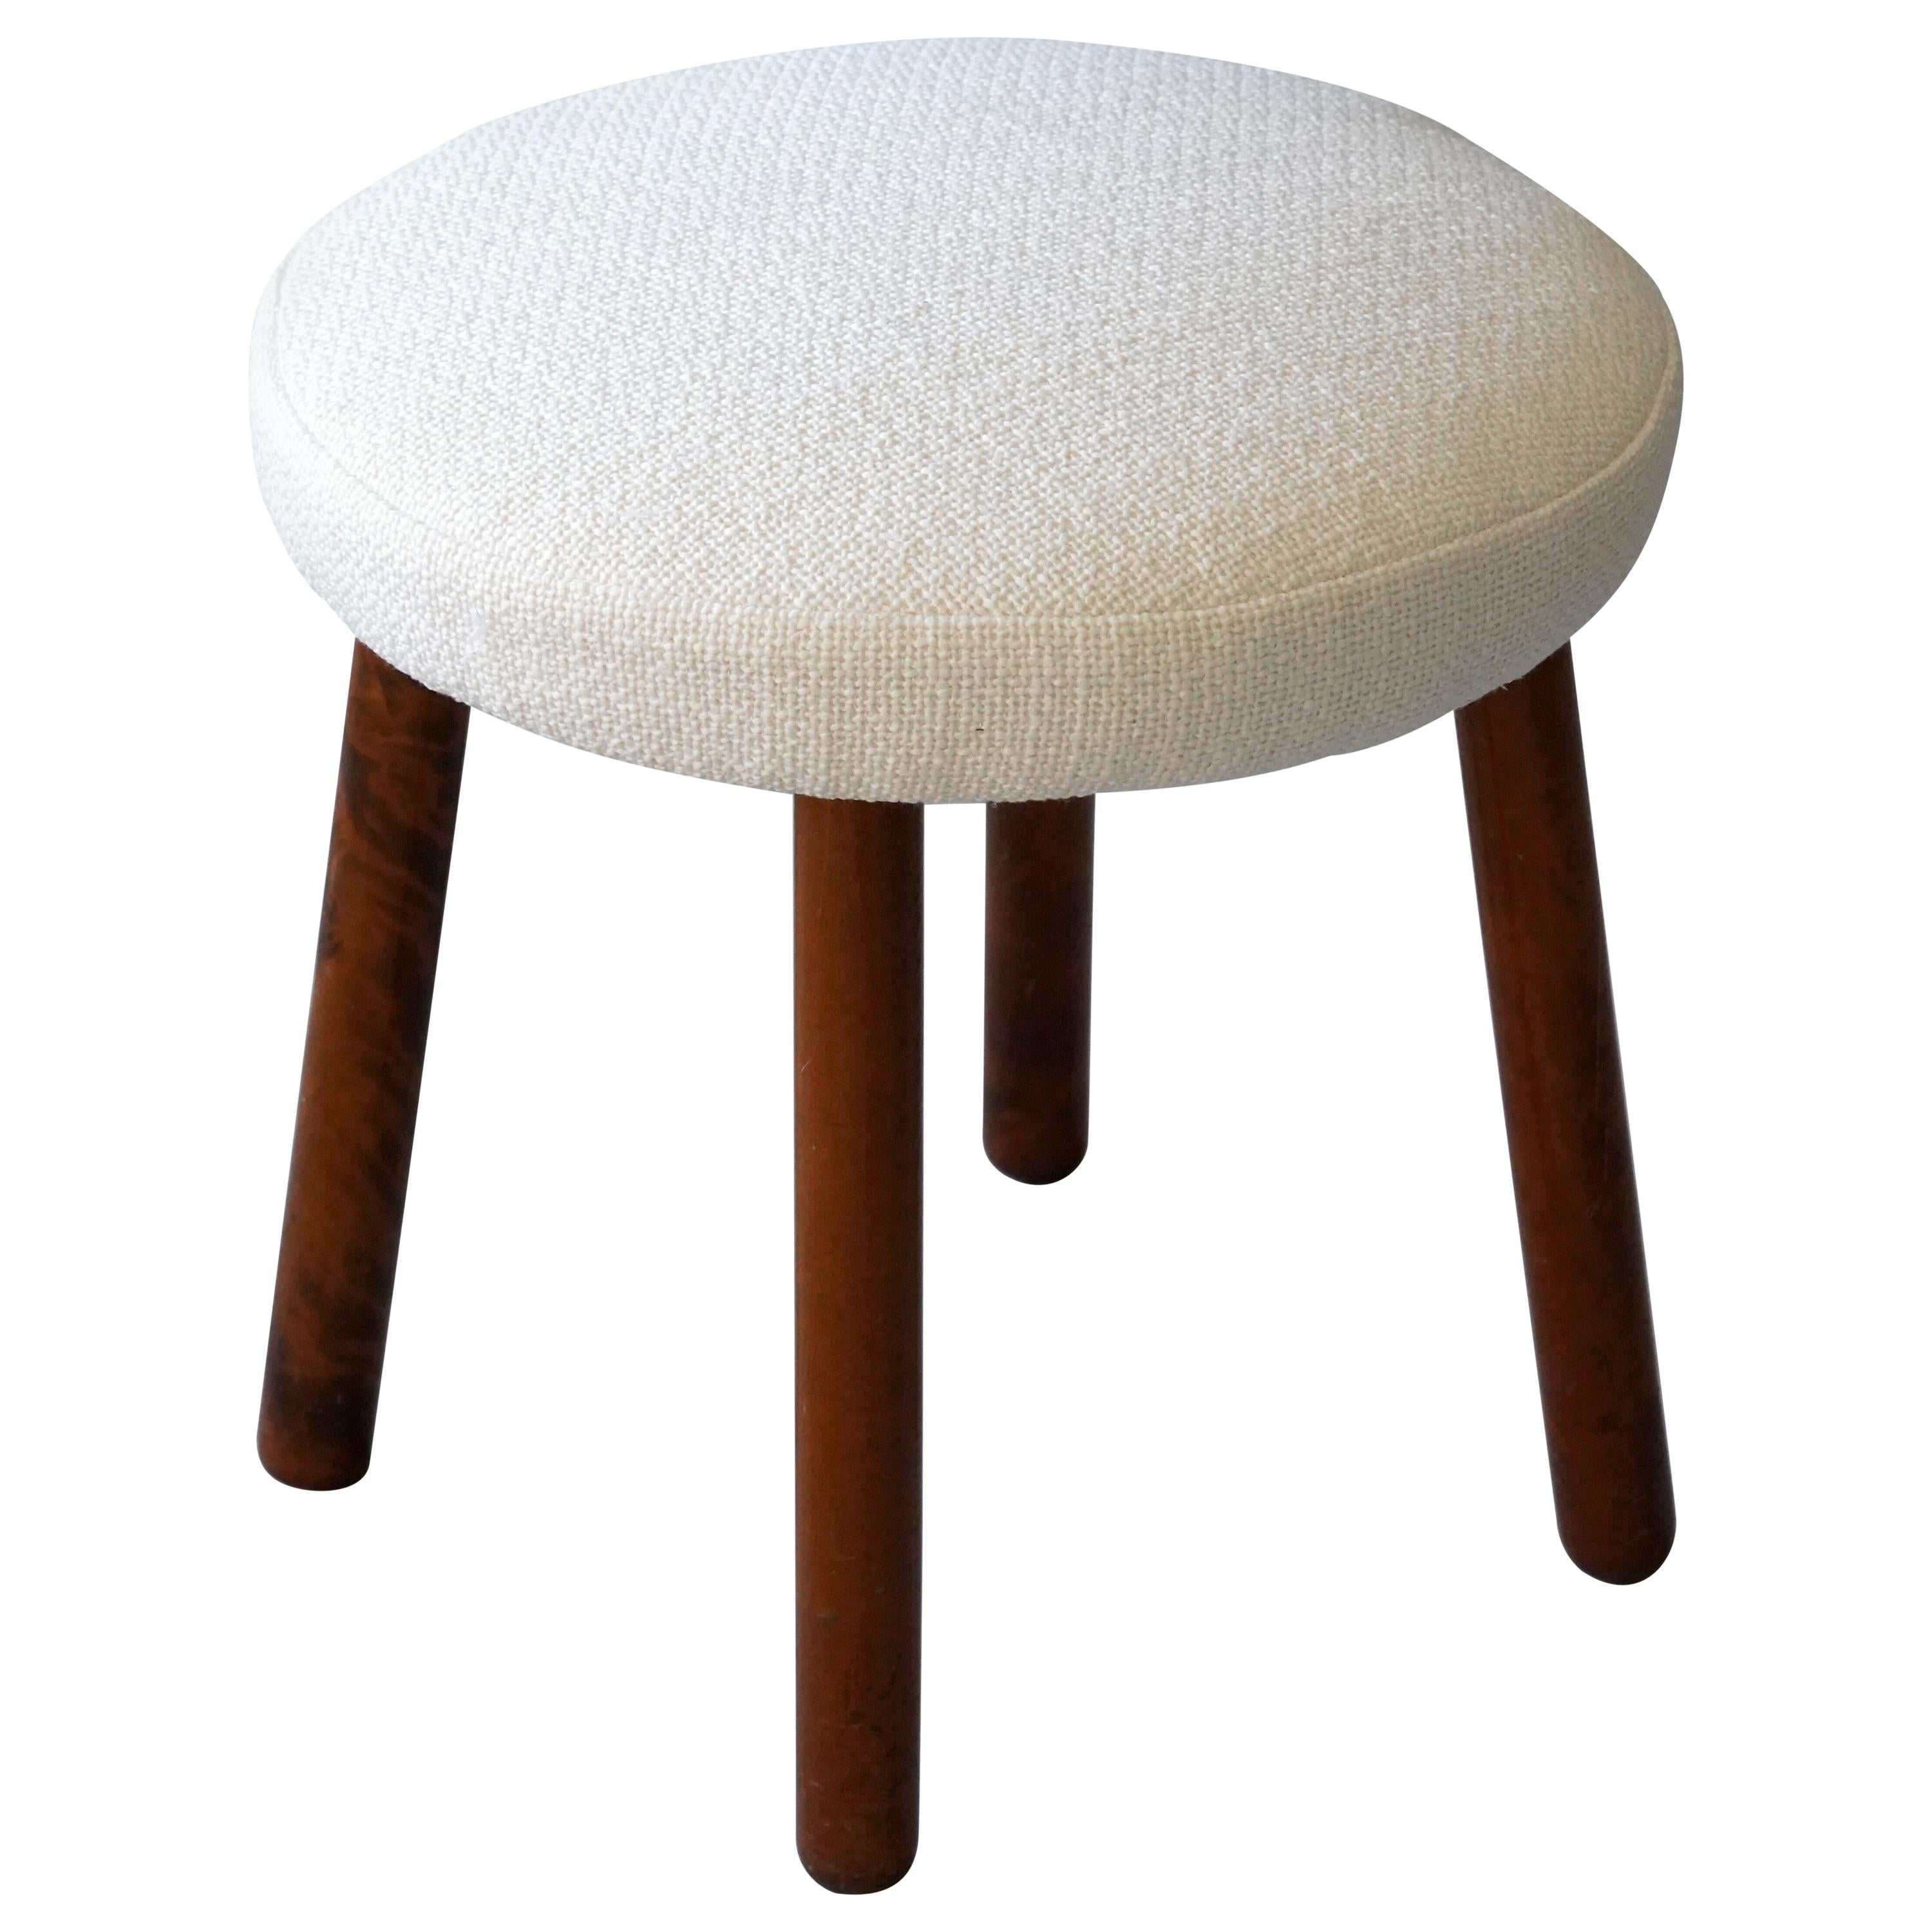 Georg Kofoed, Modernist Stool, Stained Wood, White Fabric, Denmark, 1940s